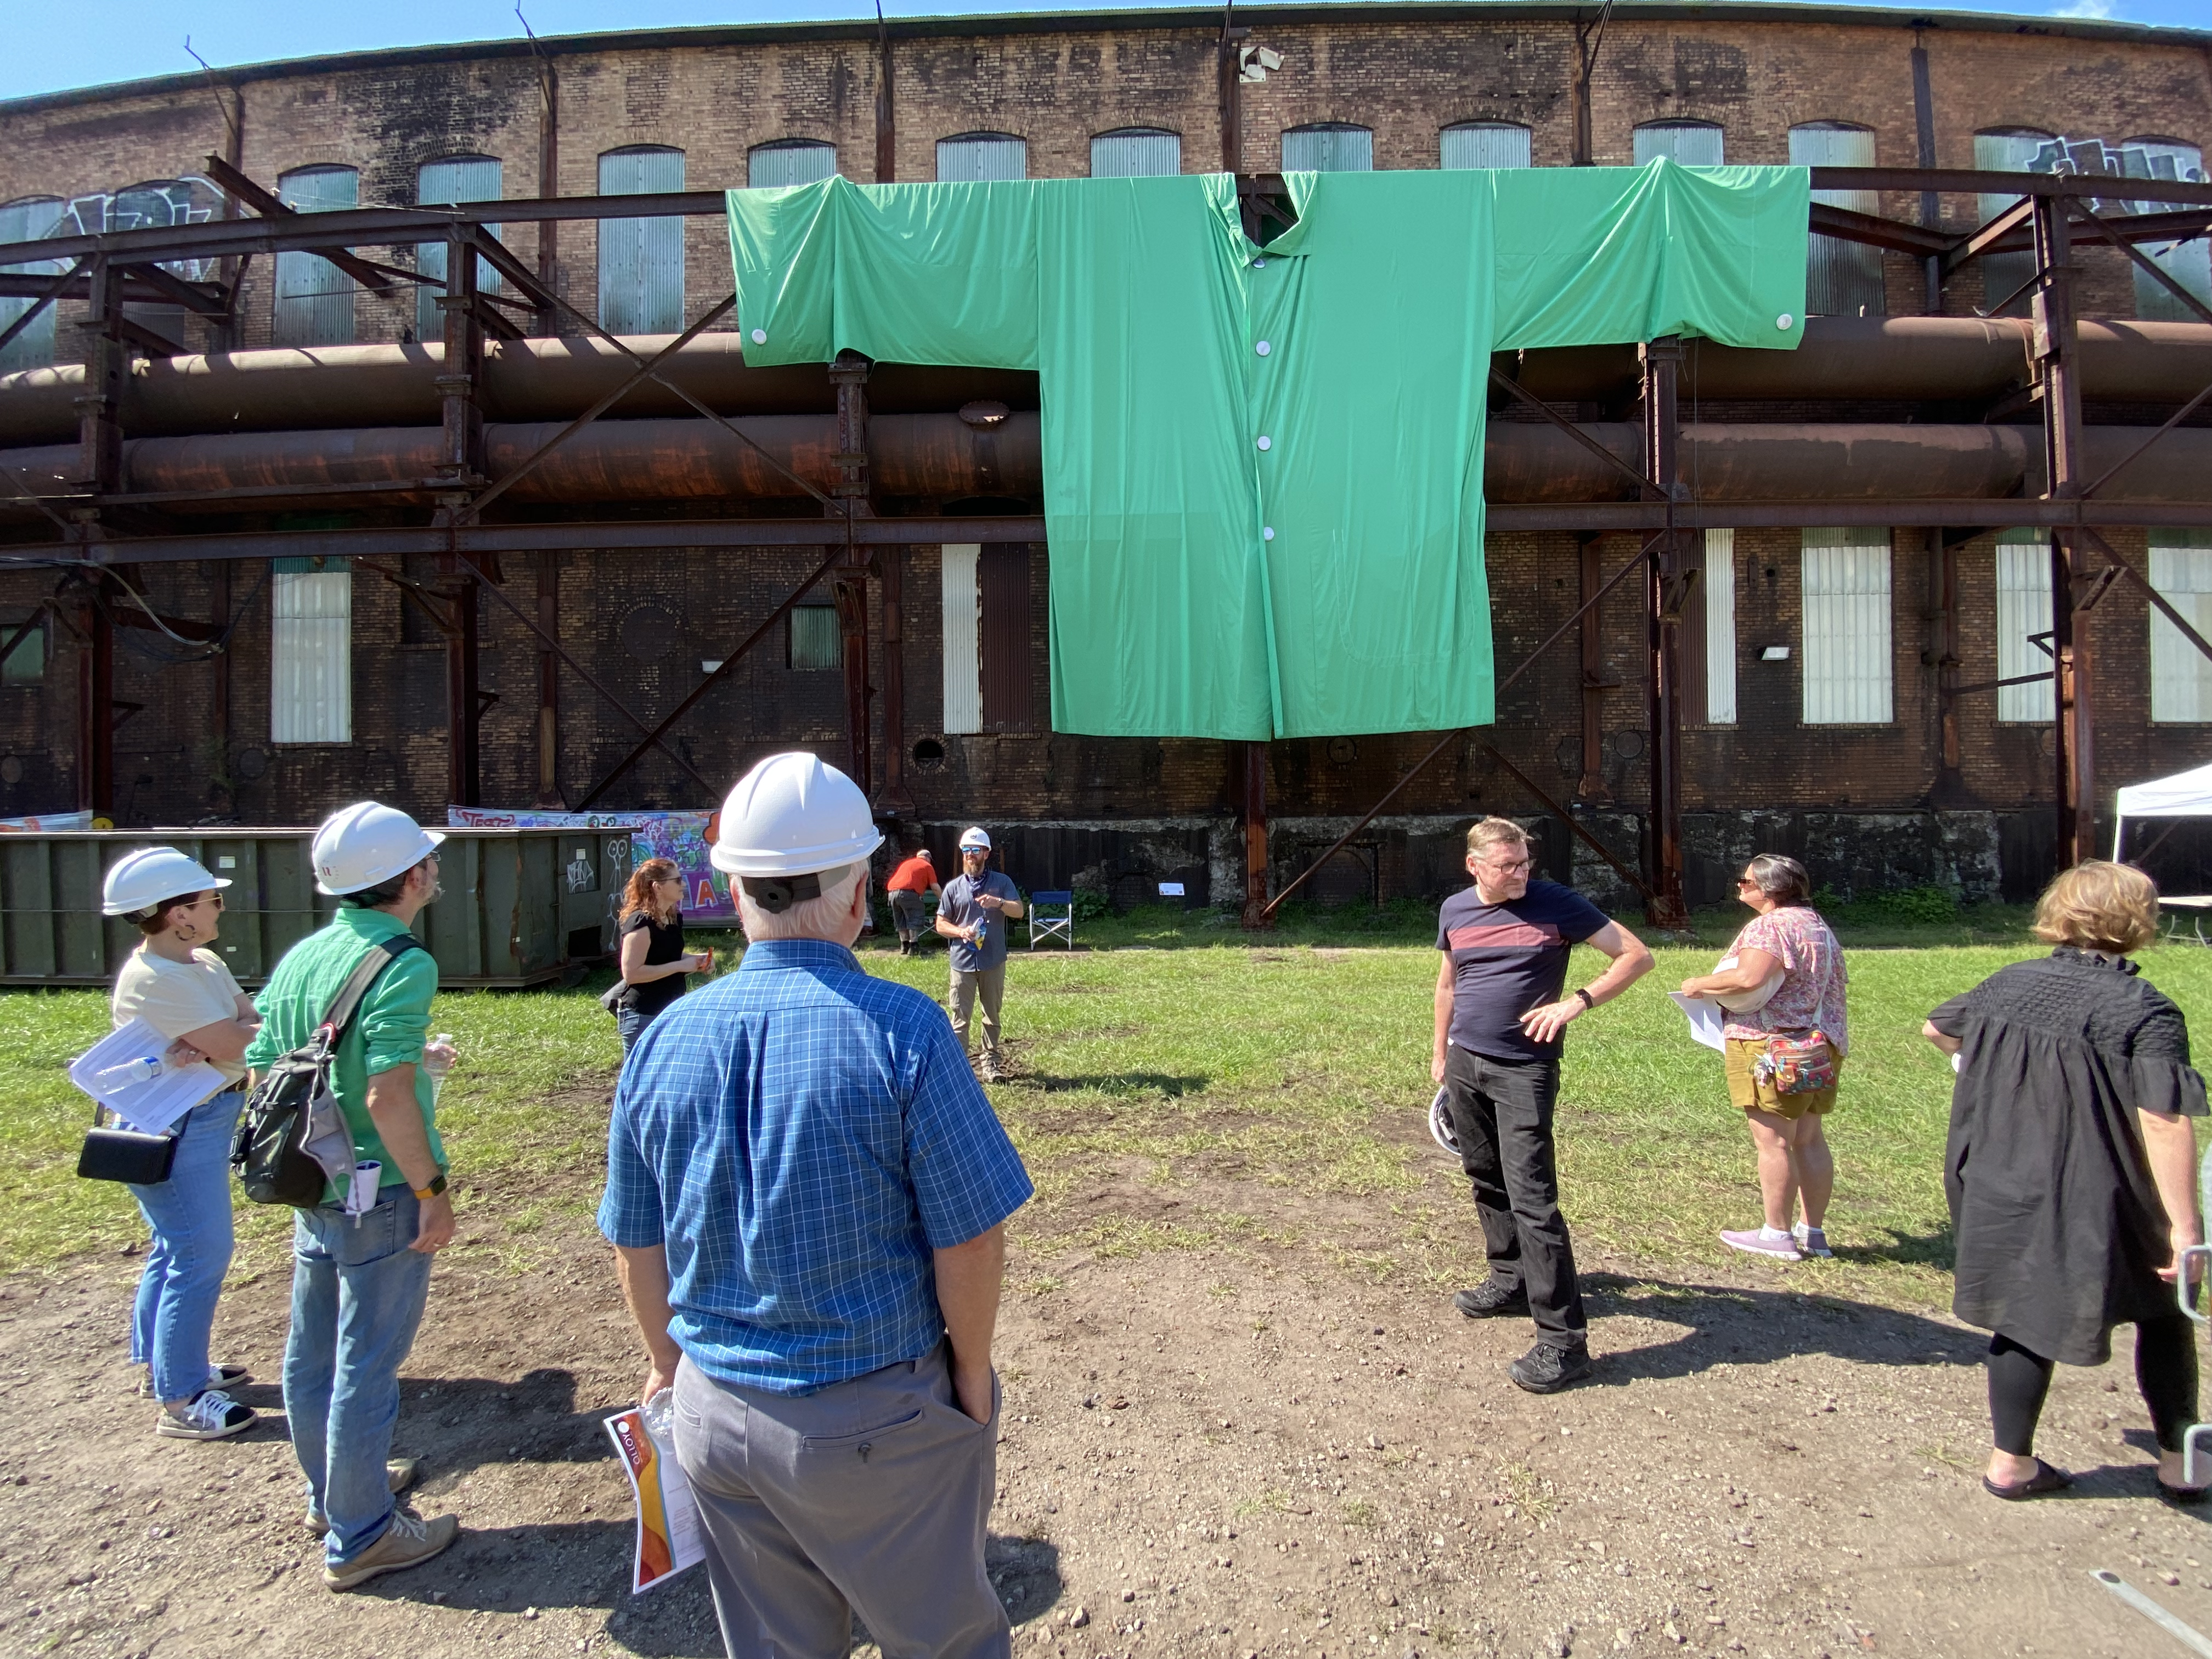 Nine people standing under a large green T-shirt hanging outside